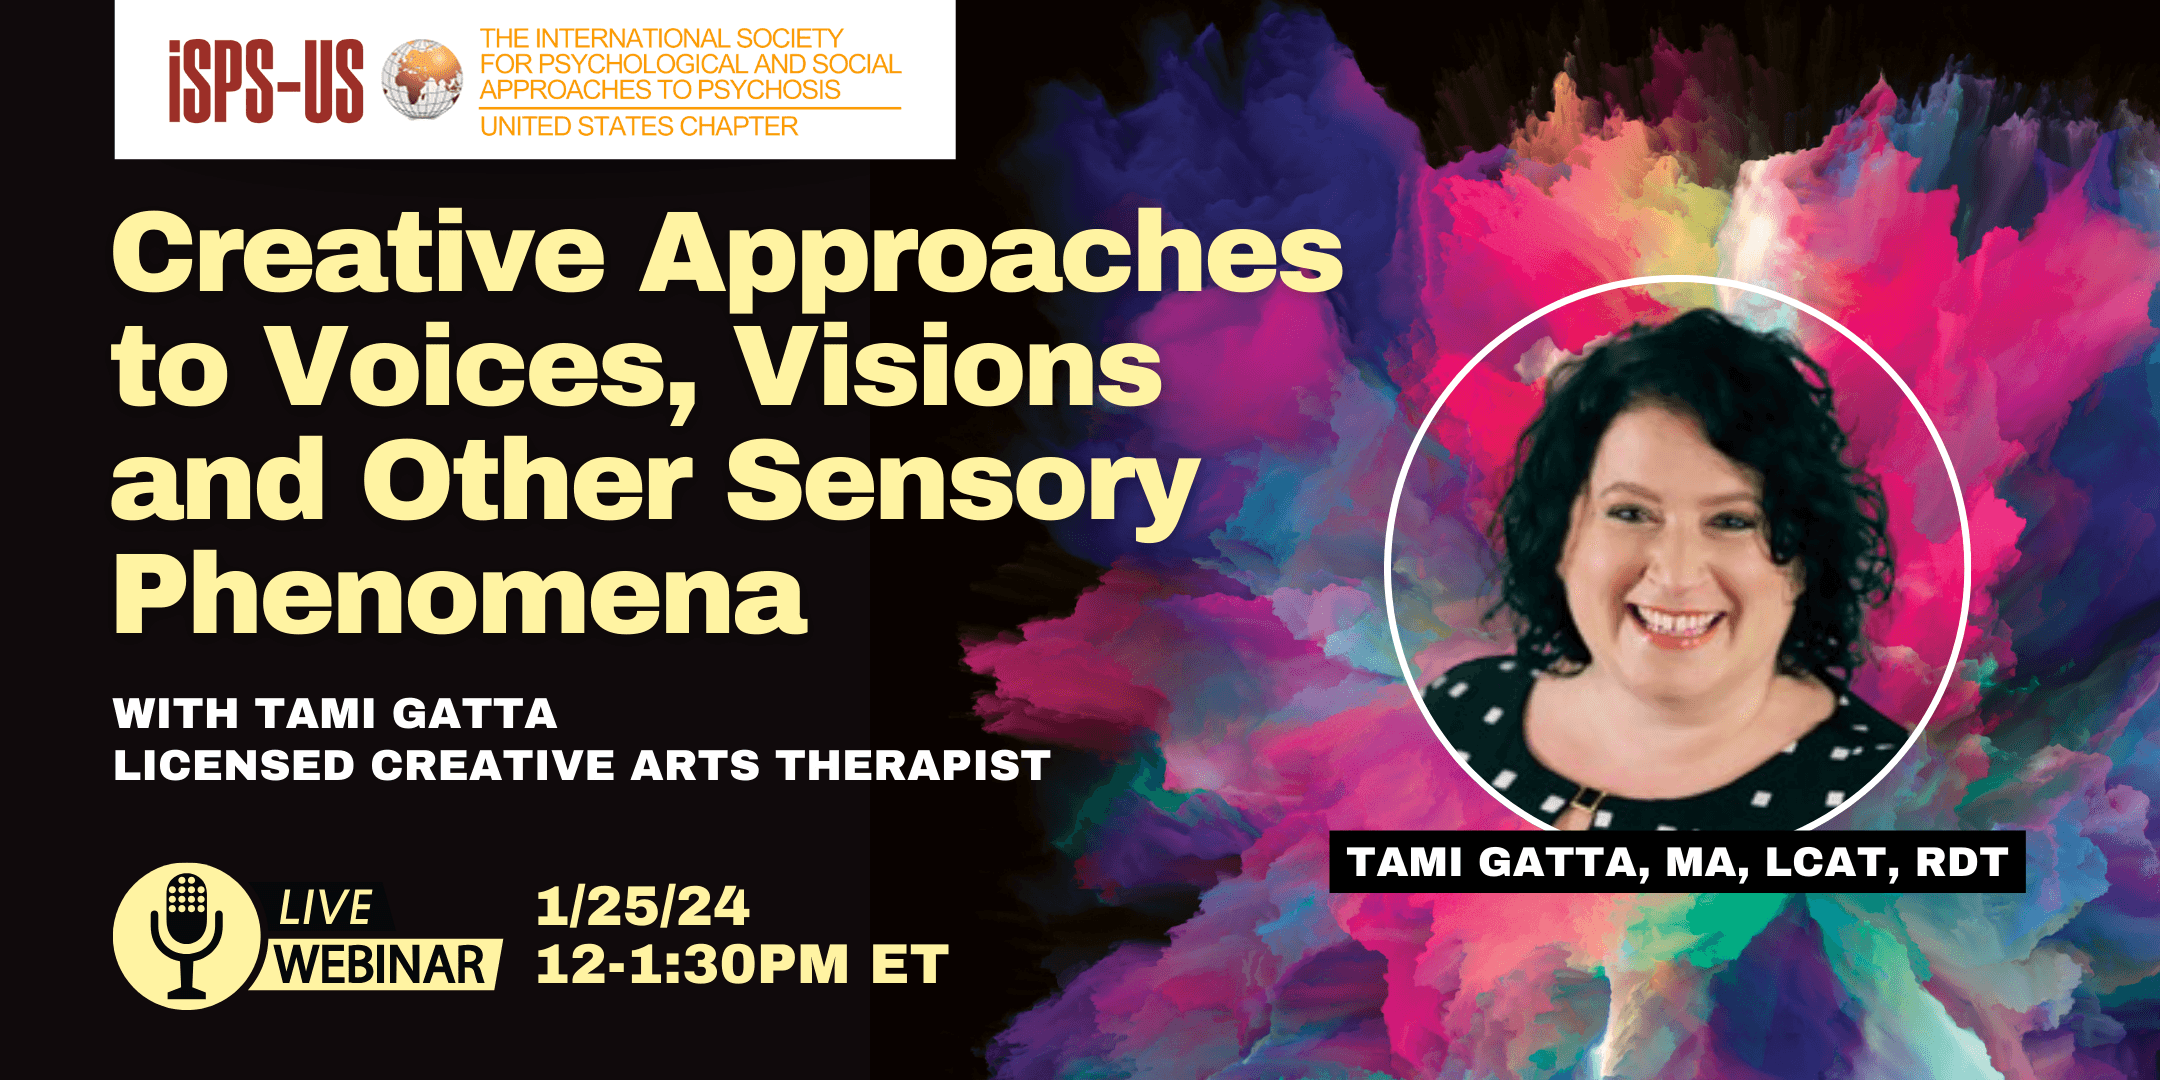 Upcoming Webinar 1/25/24 | Creative Approaches to Voices, Visions, and Other Sensory Phenomena 